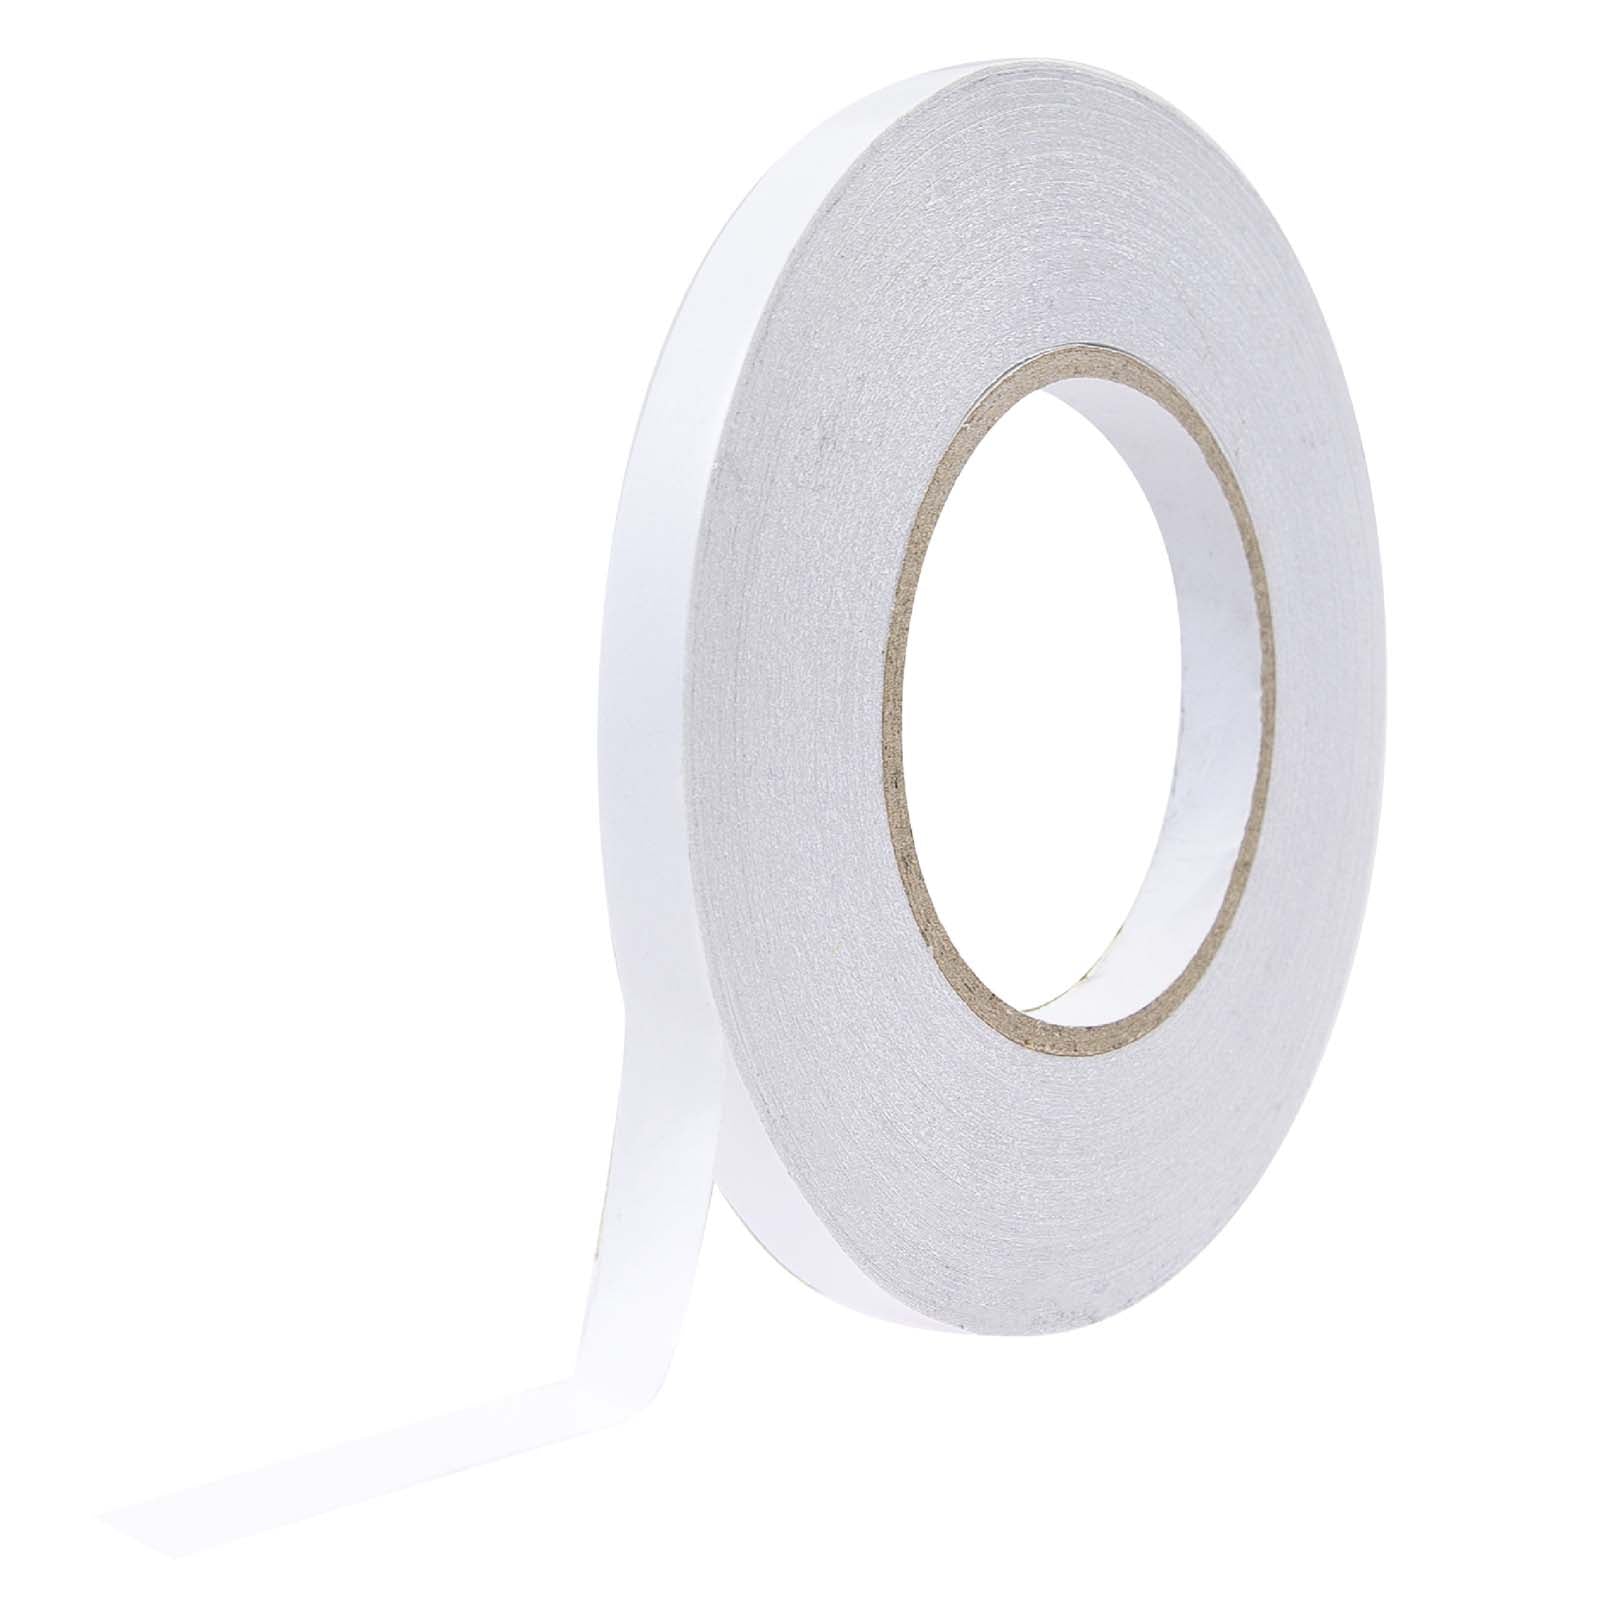 Indoor Double Sided Craft Tape - 164' x 0.47 Roll – Permastik